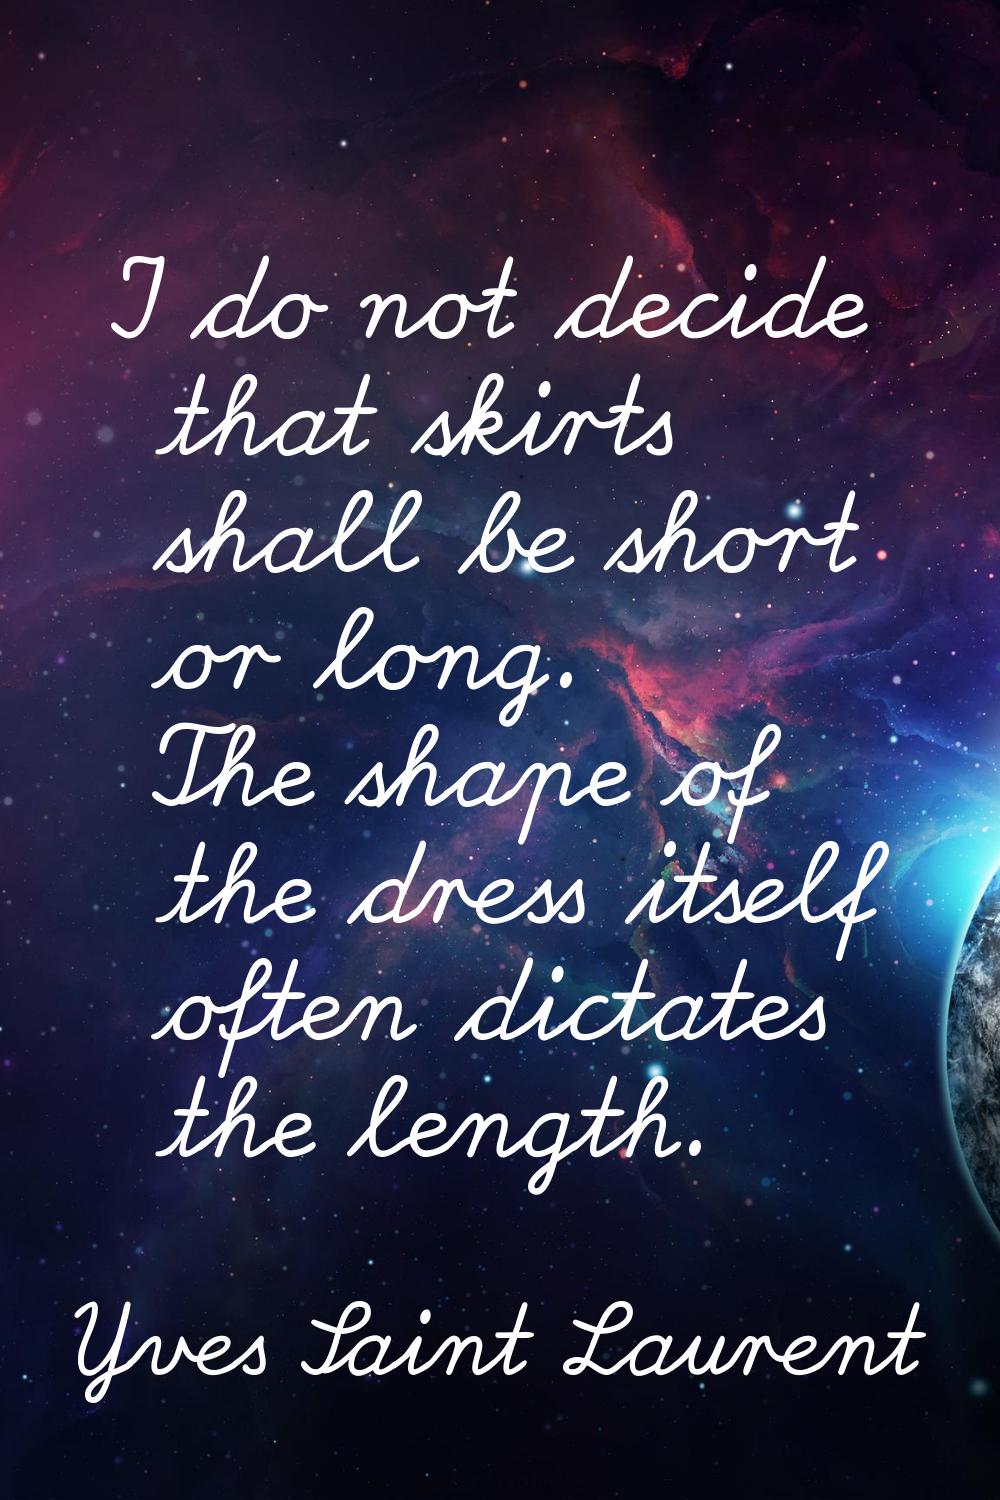 I do not decide that skirts shall be short or long. The shape of the dress itself often dictates th